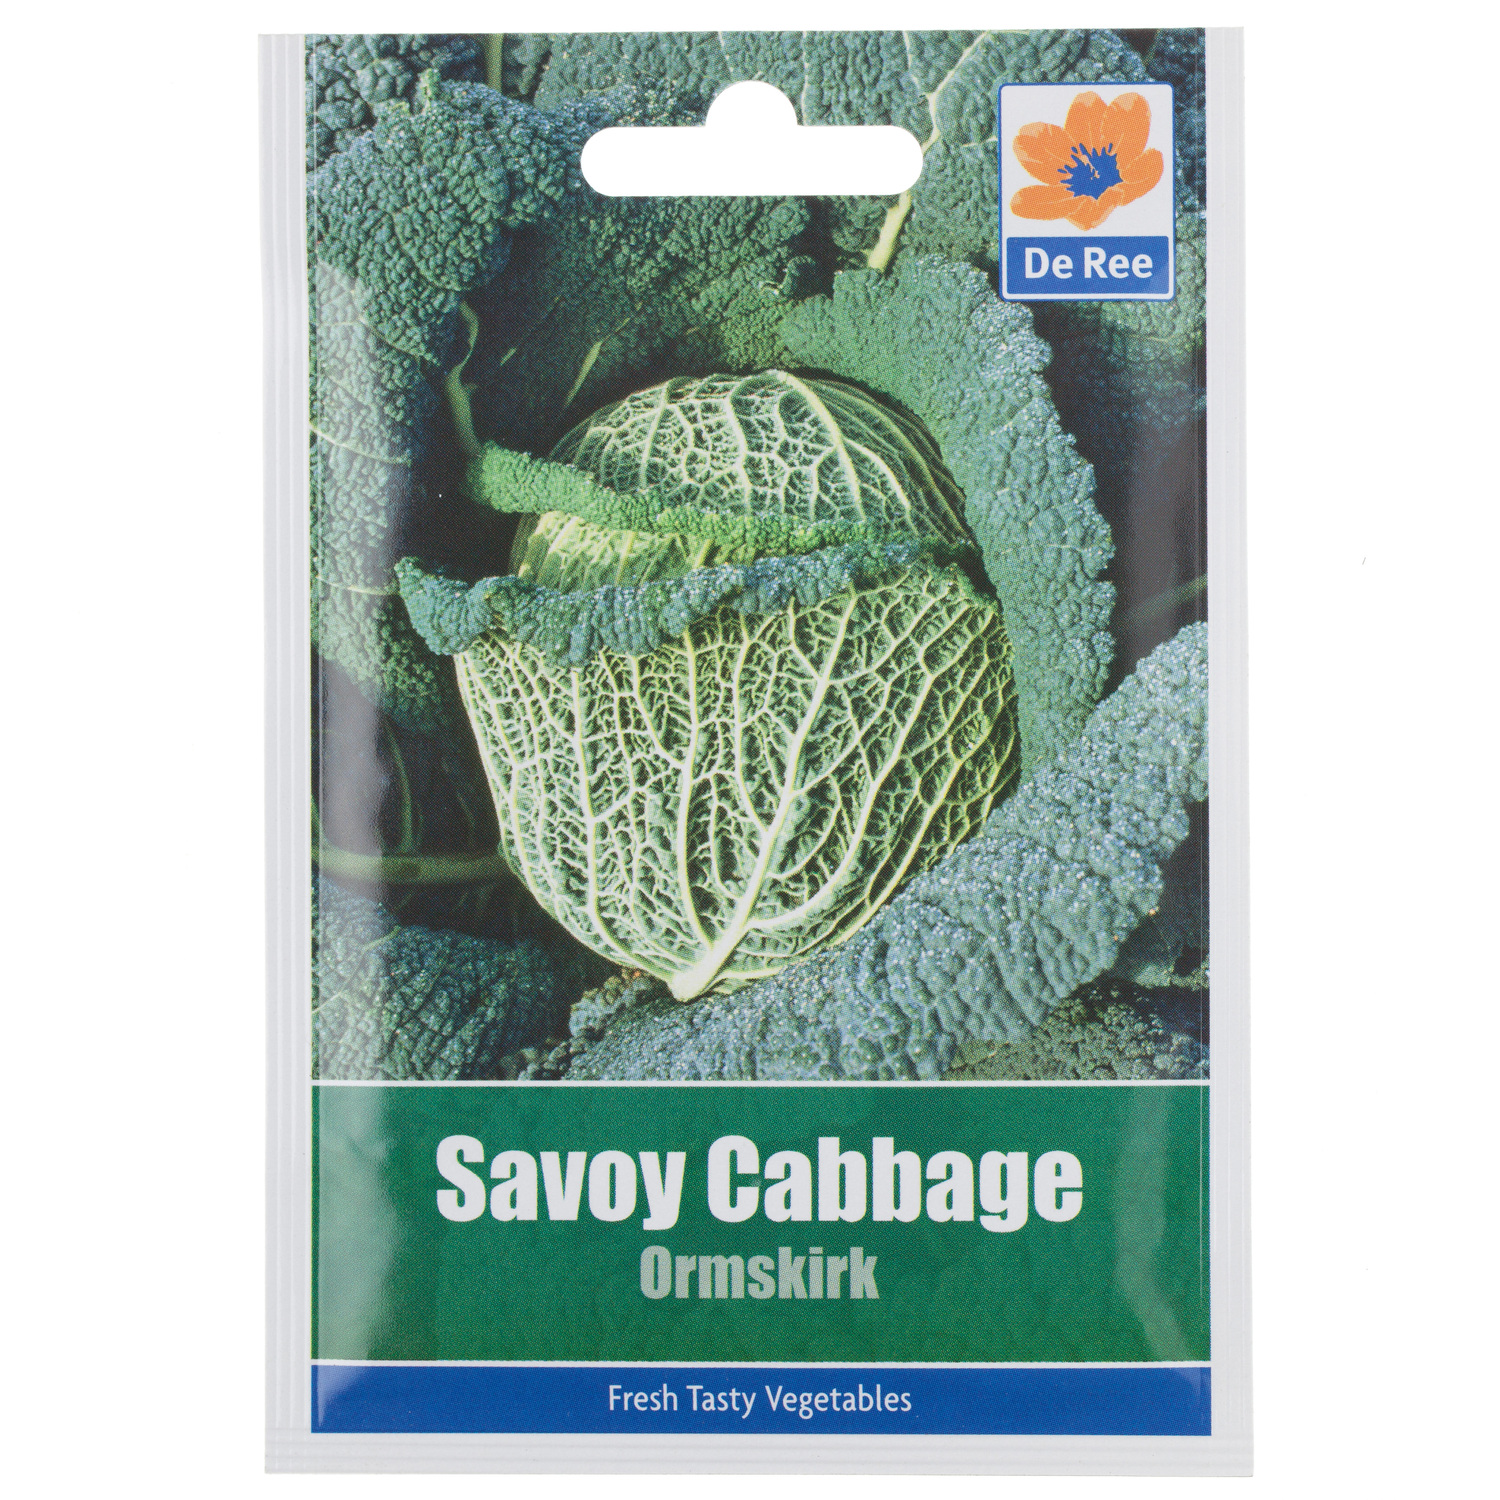 Cabbage Savoy Ormskirk Seed Packet Image